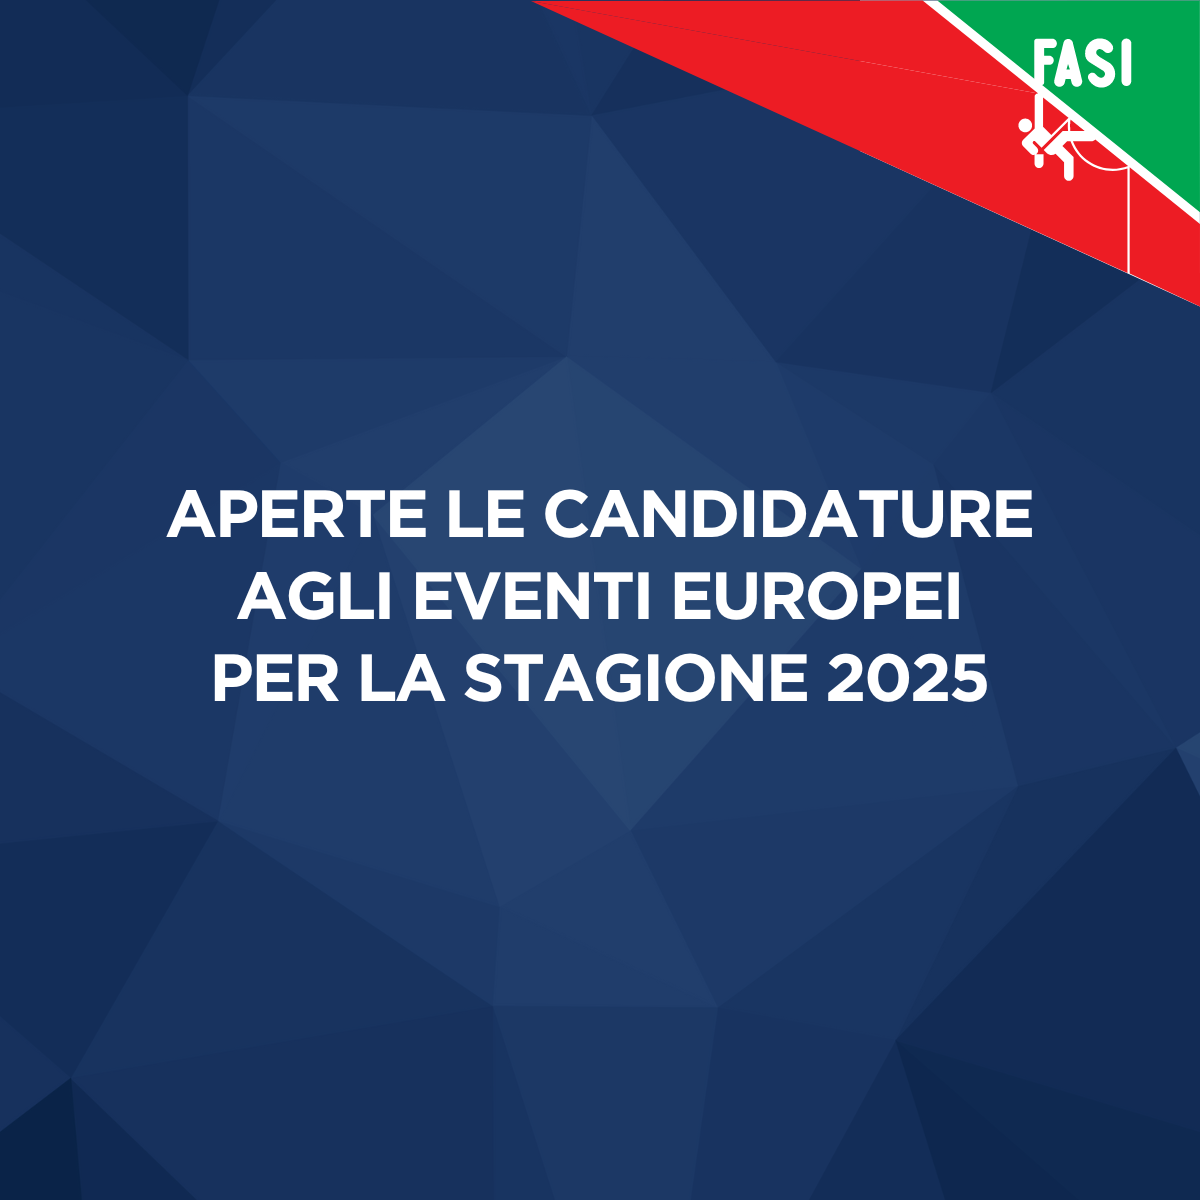 images/FASI_Candidature_Europee_2025.png